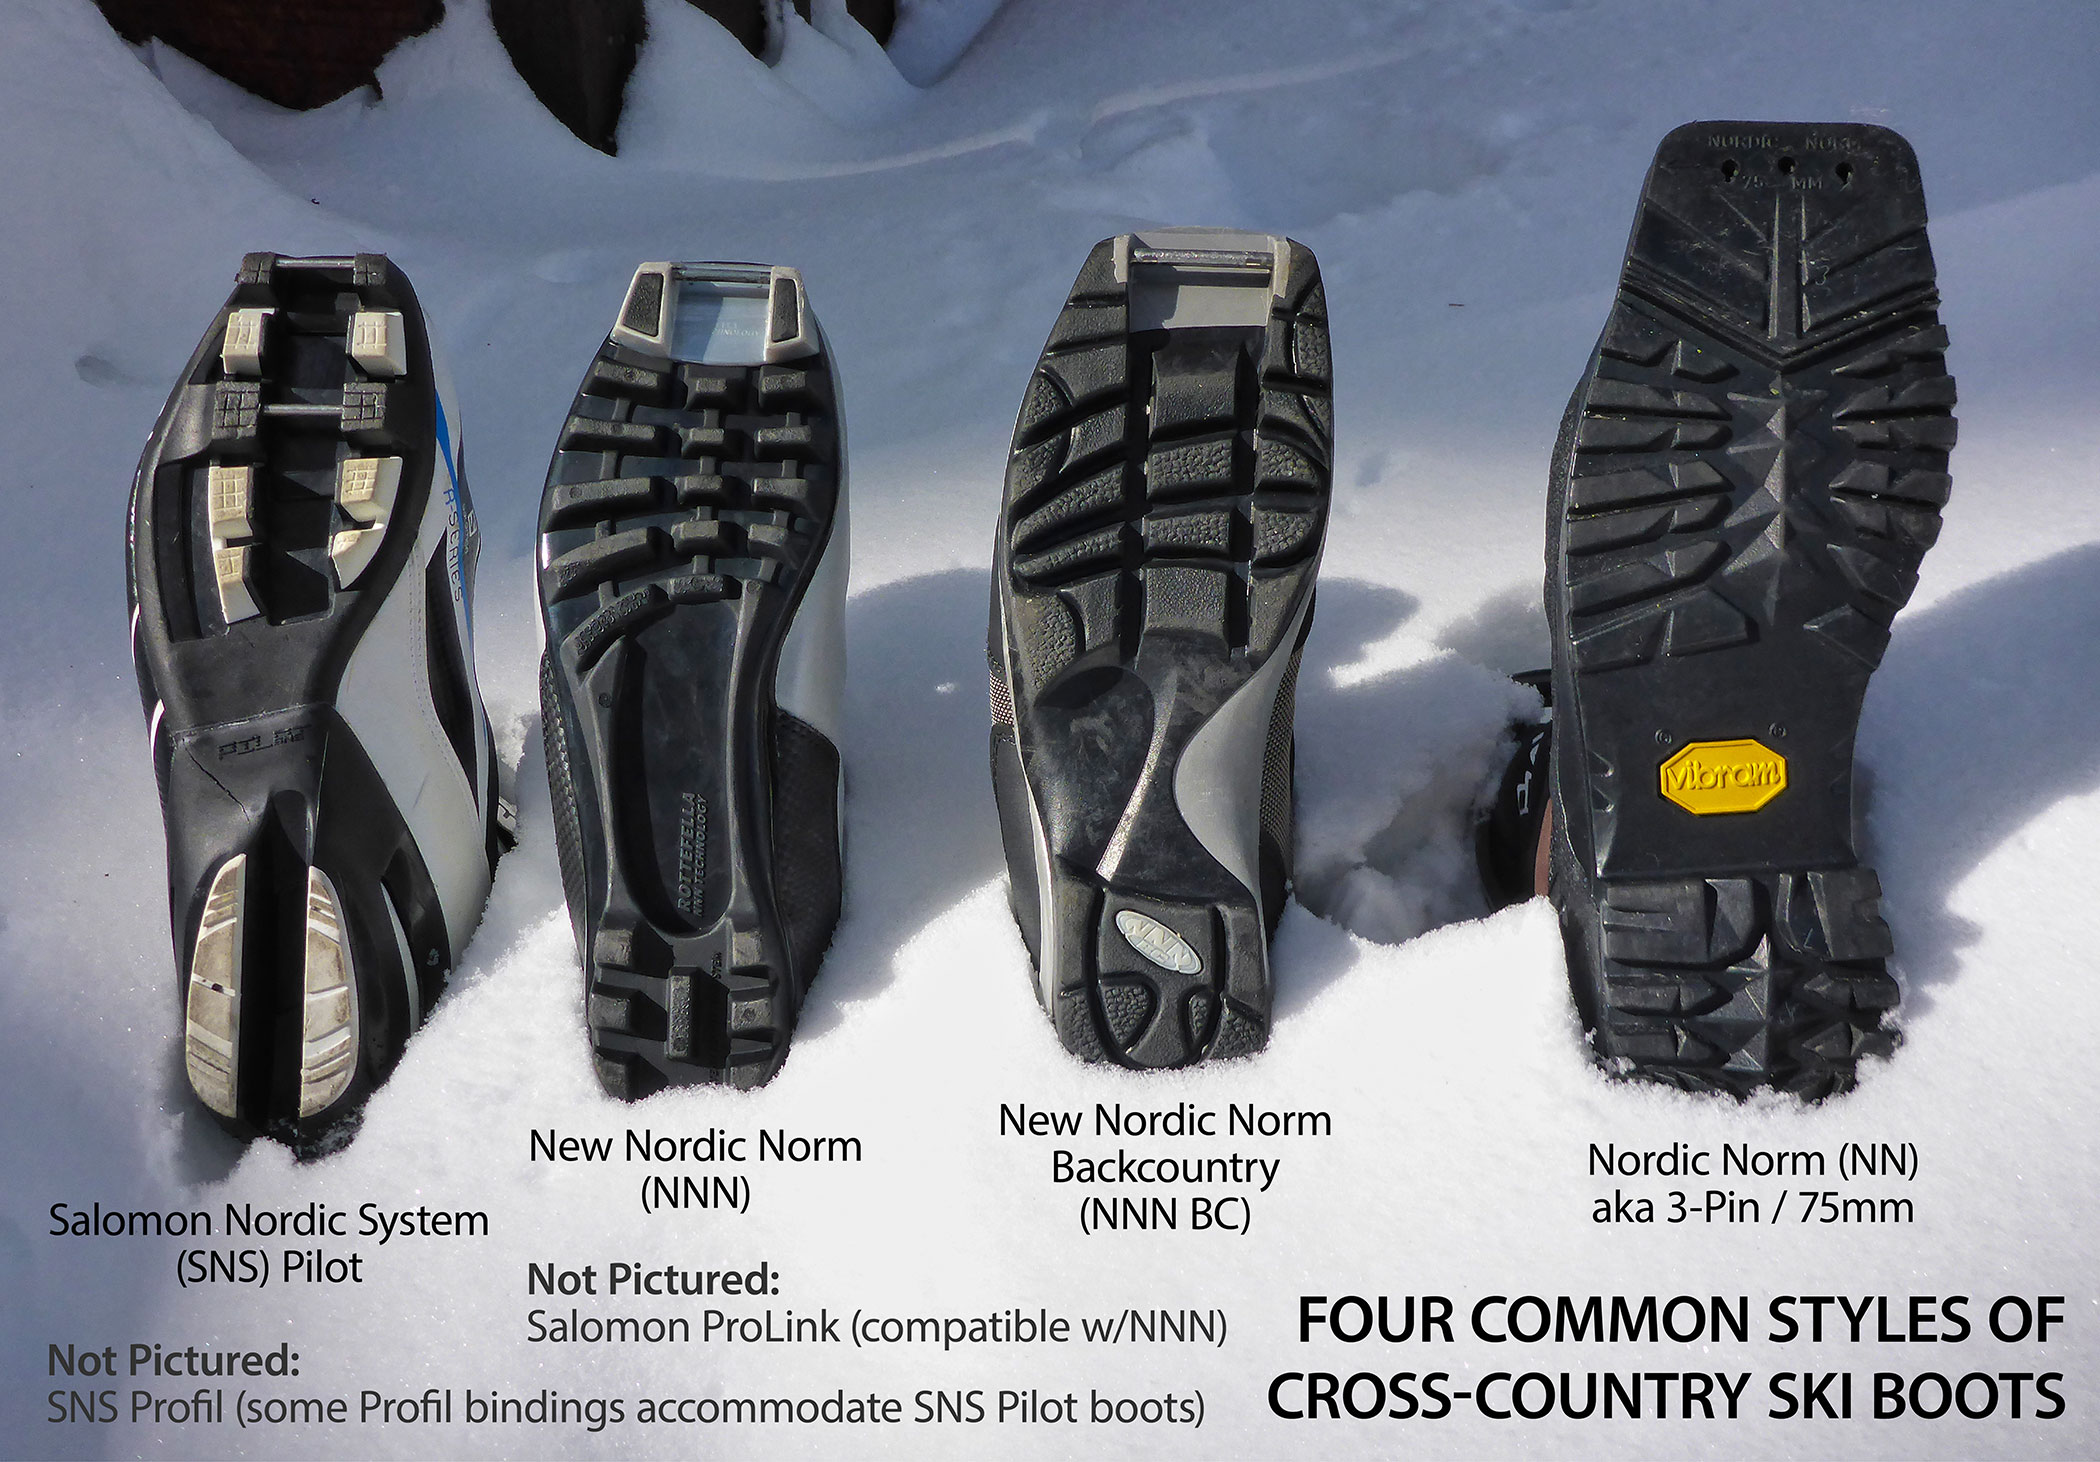 XC Skiing Explained (Part 5): Classic Cross-Country Ski Boots - Tahoe Trail  Guide